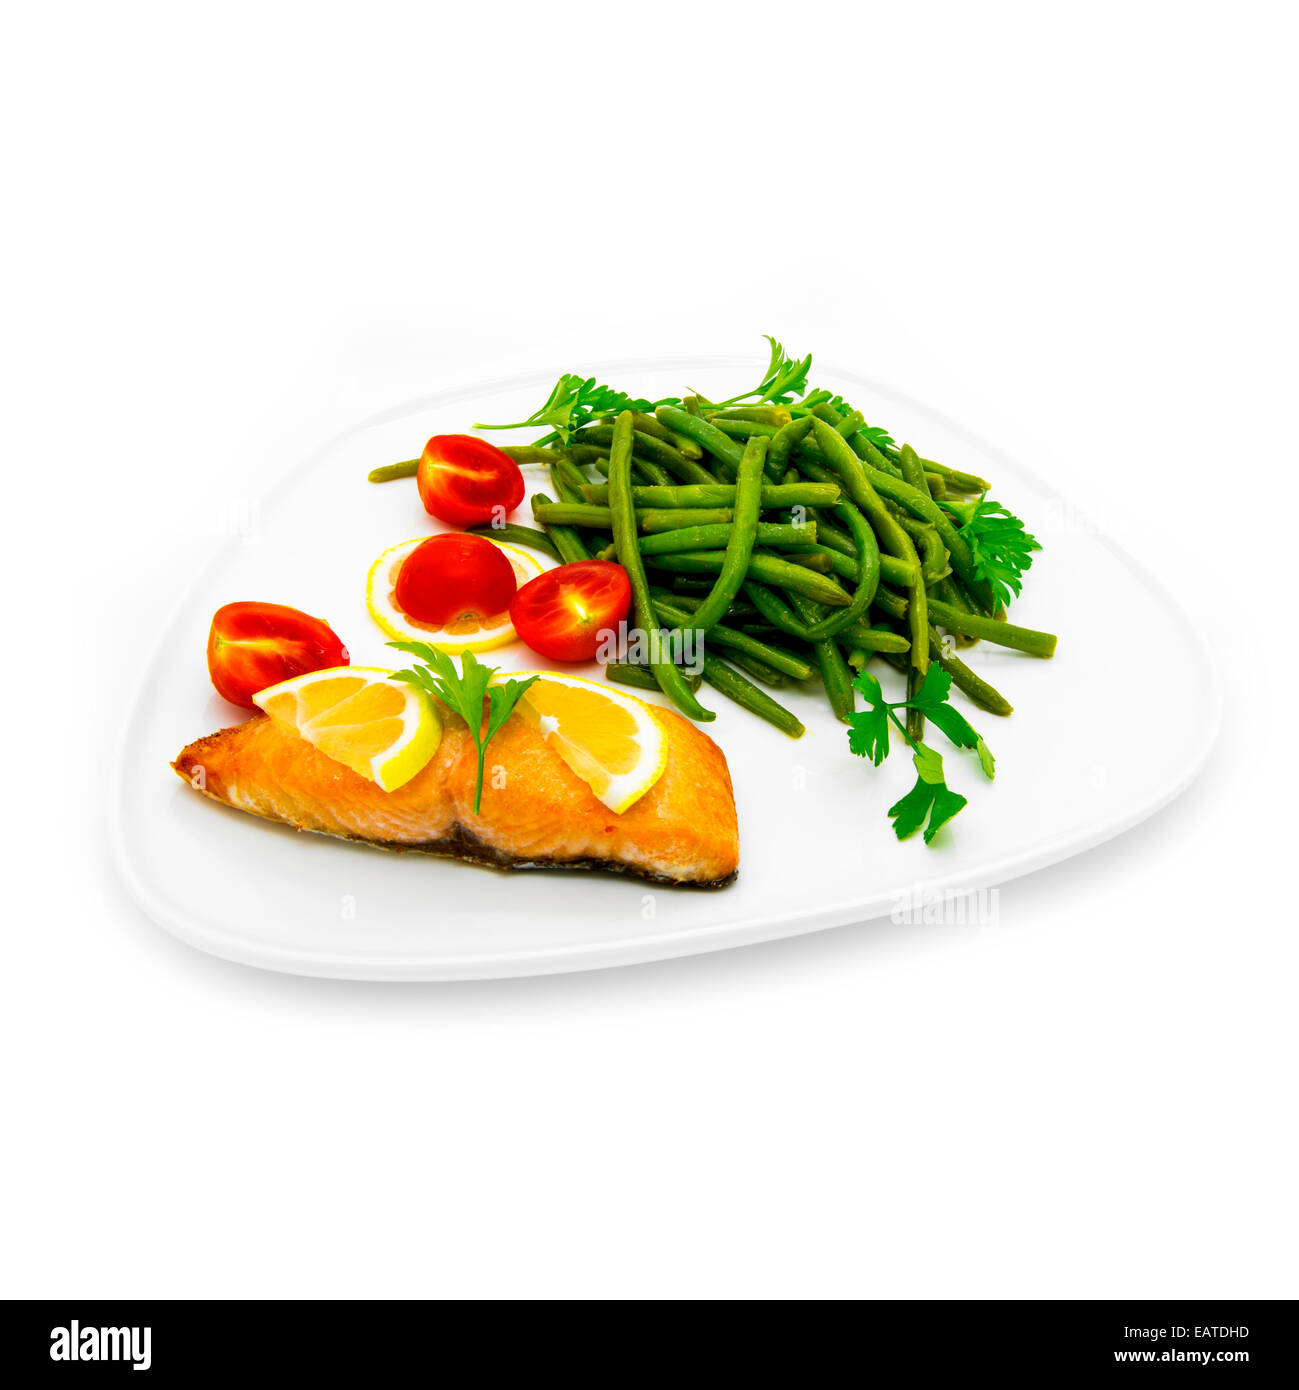 Salmon fish with green beans. White background. Stock Photo